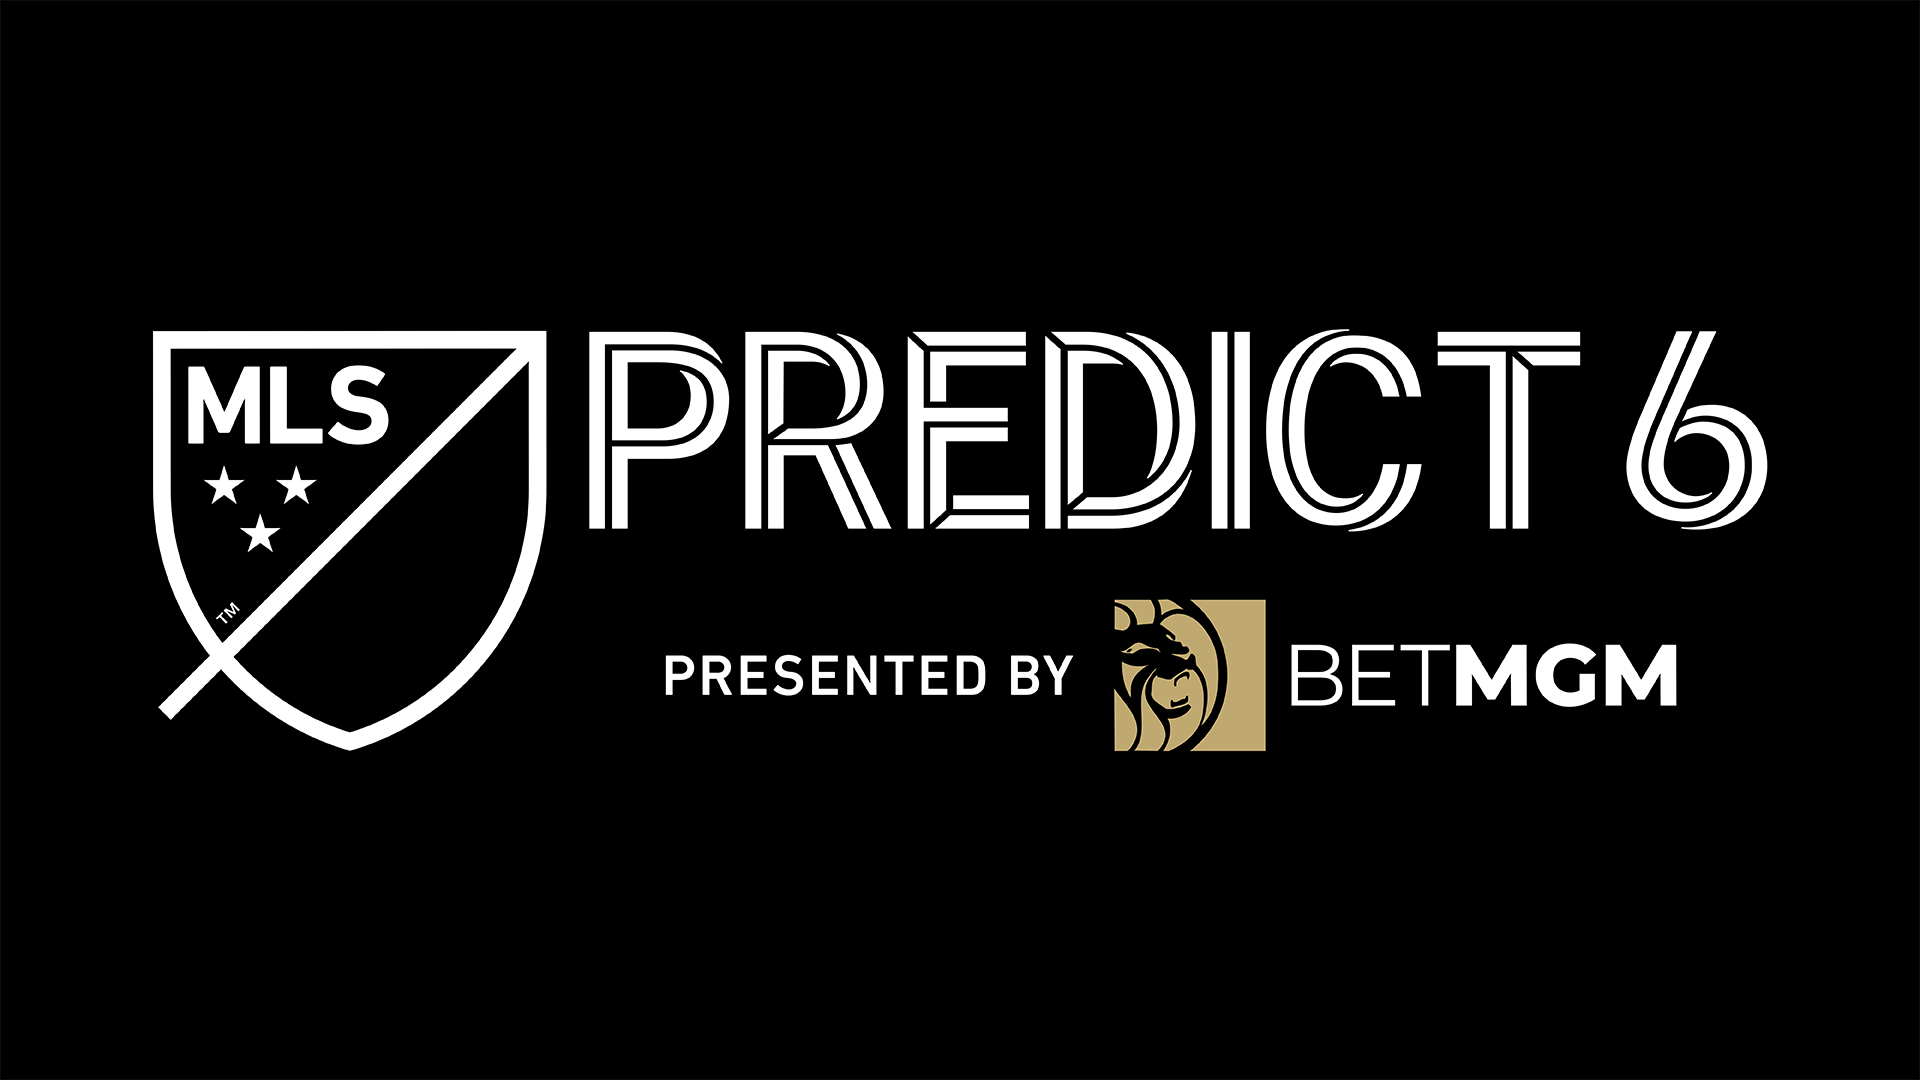 MLS Predict 6 presented by BetMGM: Your complete guide to Week 5 | MLSSoccer.com